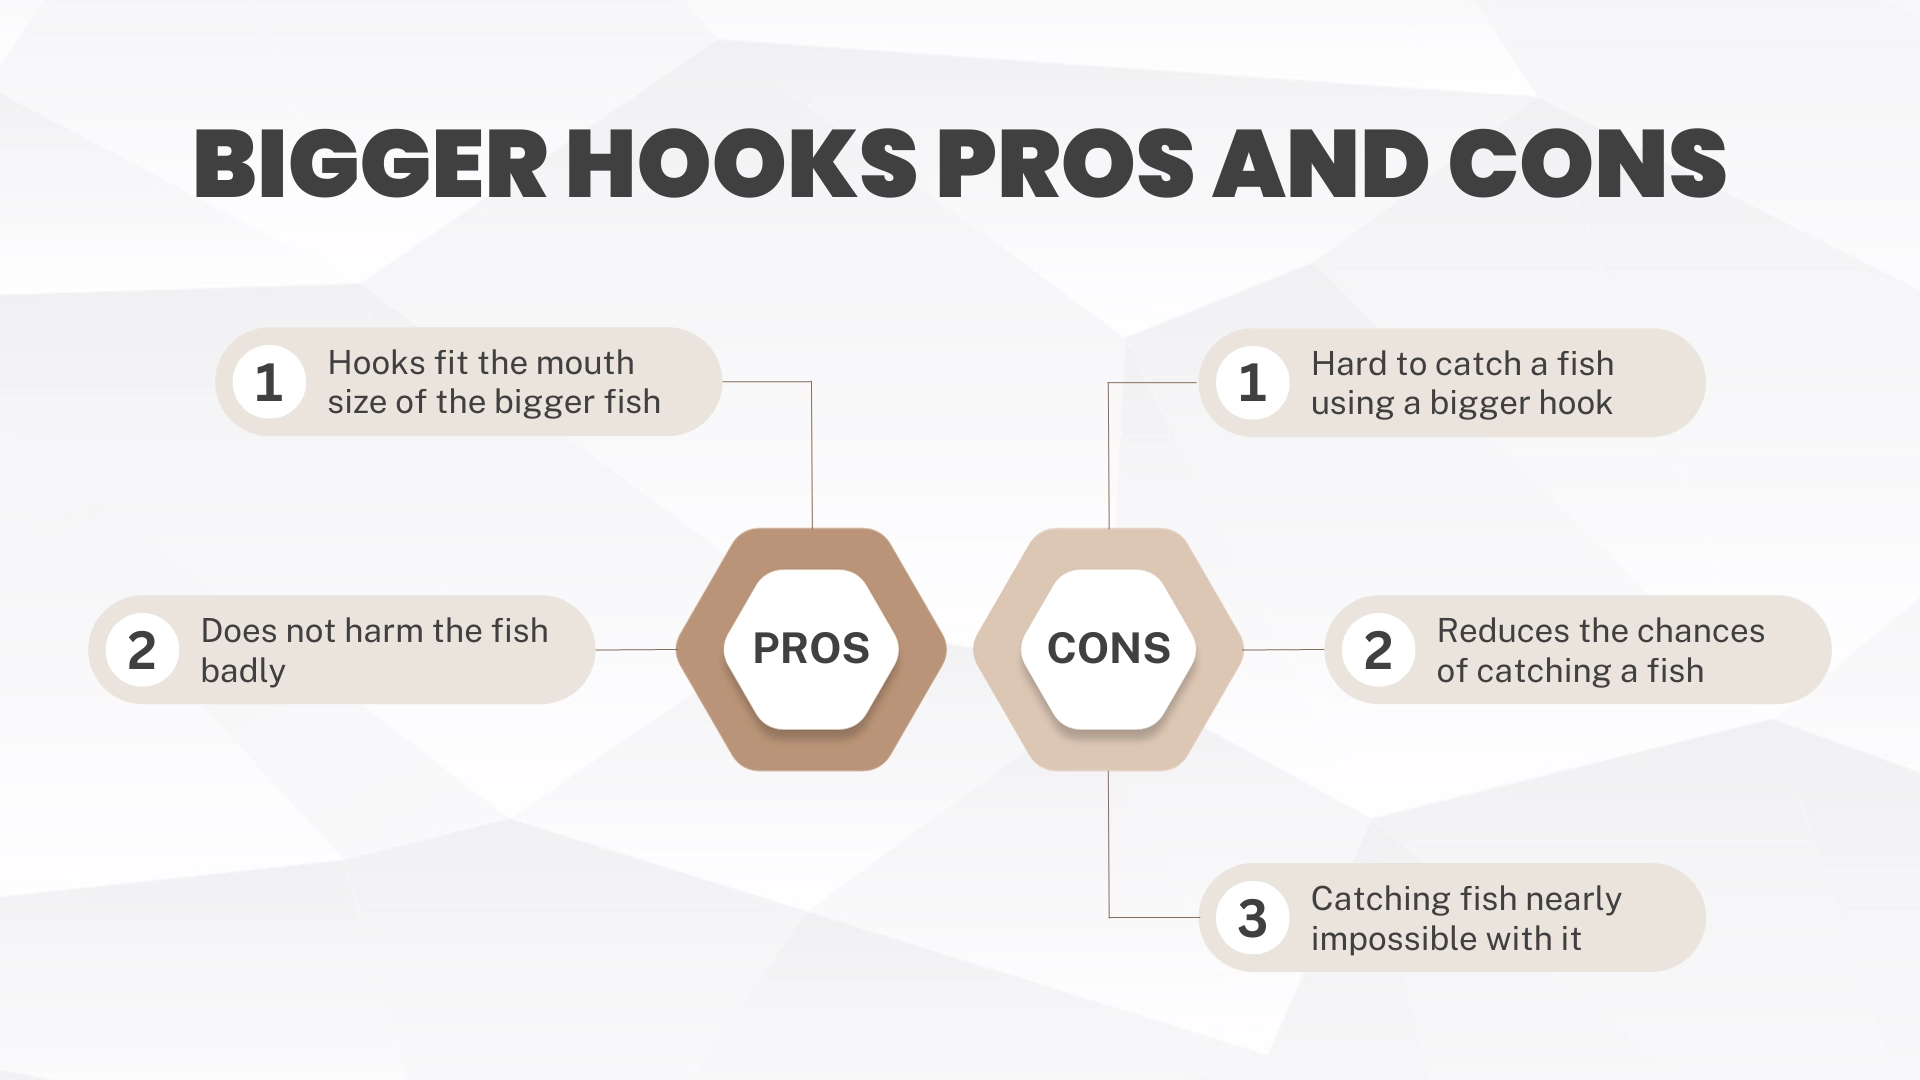 Bigger Hooks Pros and Cons